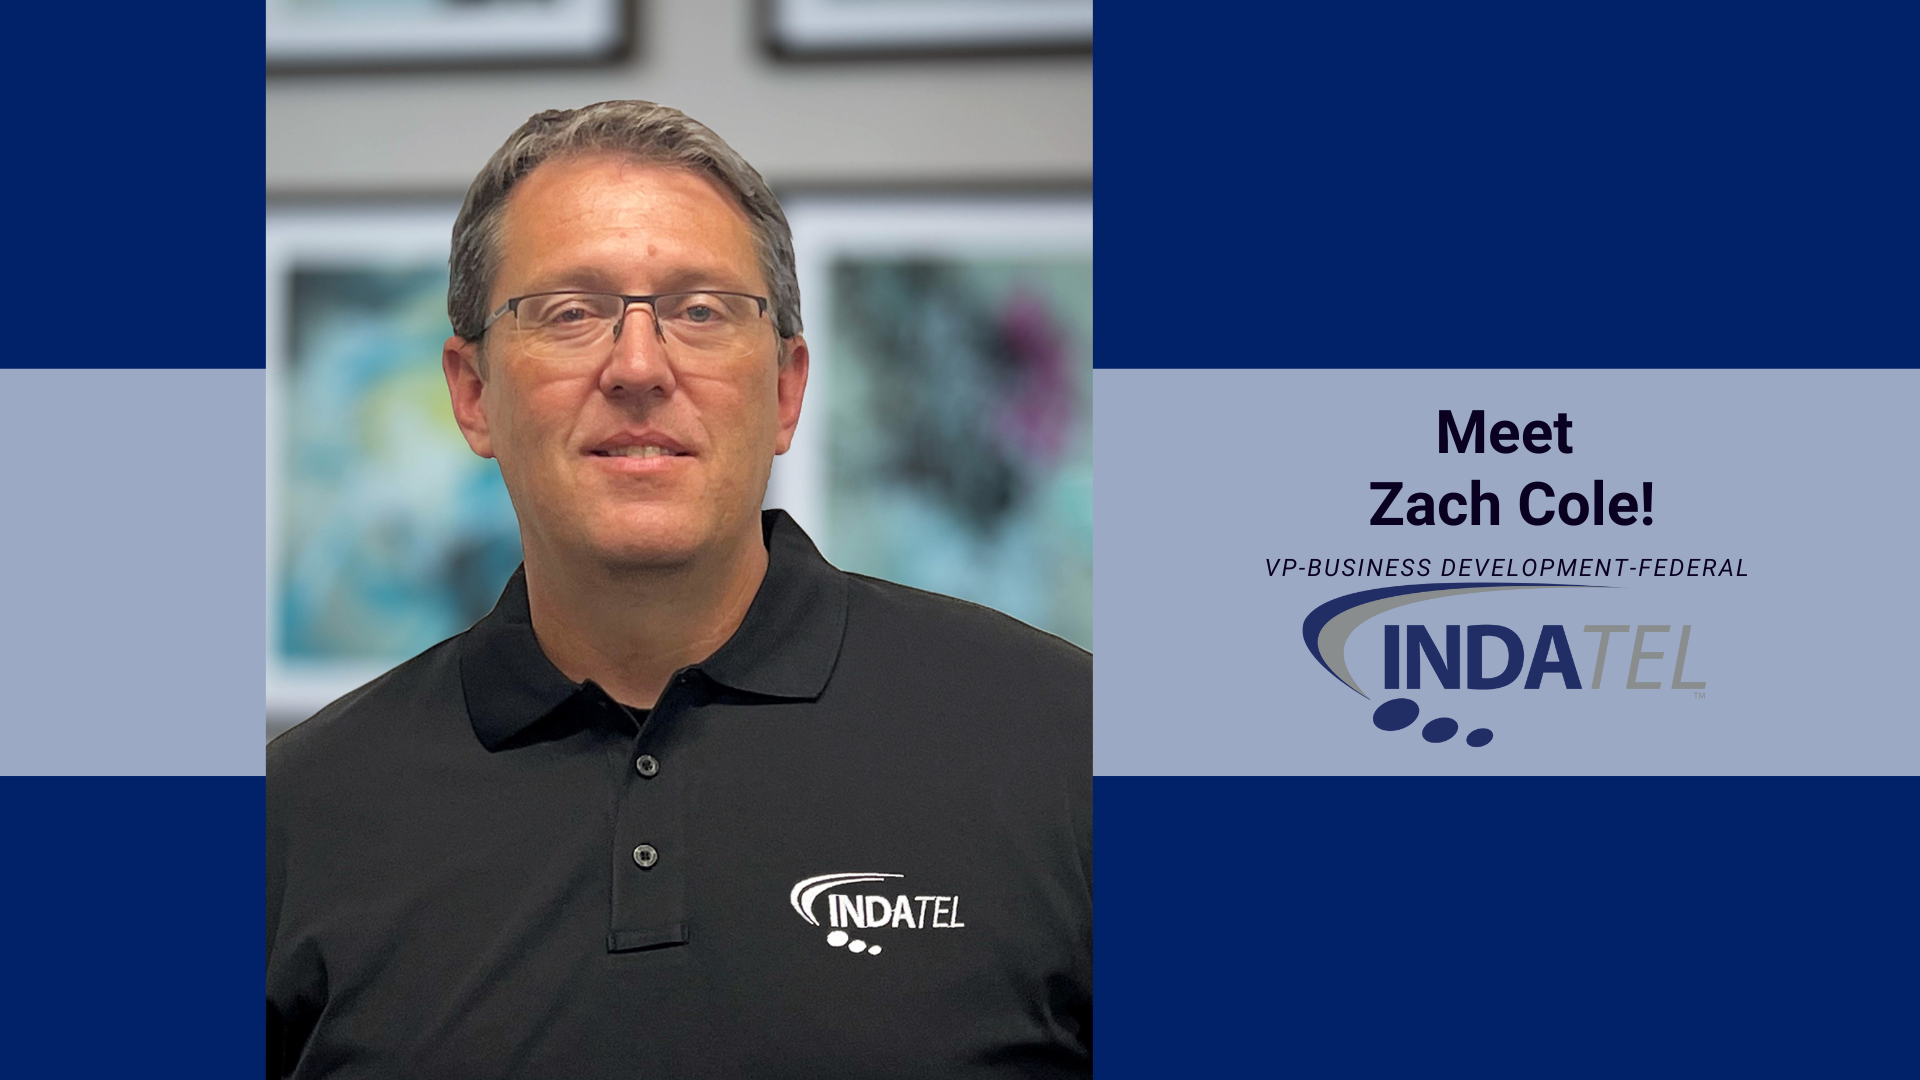 INDATEL Promotes Zach Cole to VP-Business Development-Federal: A Journey of Innovation and Excitement featured image